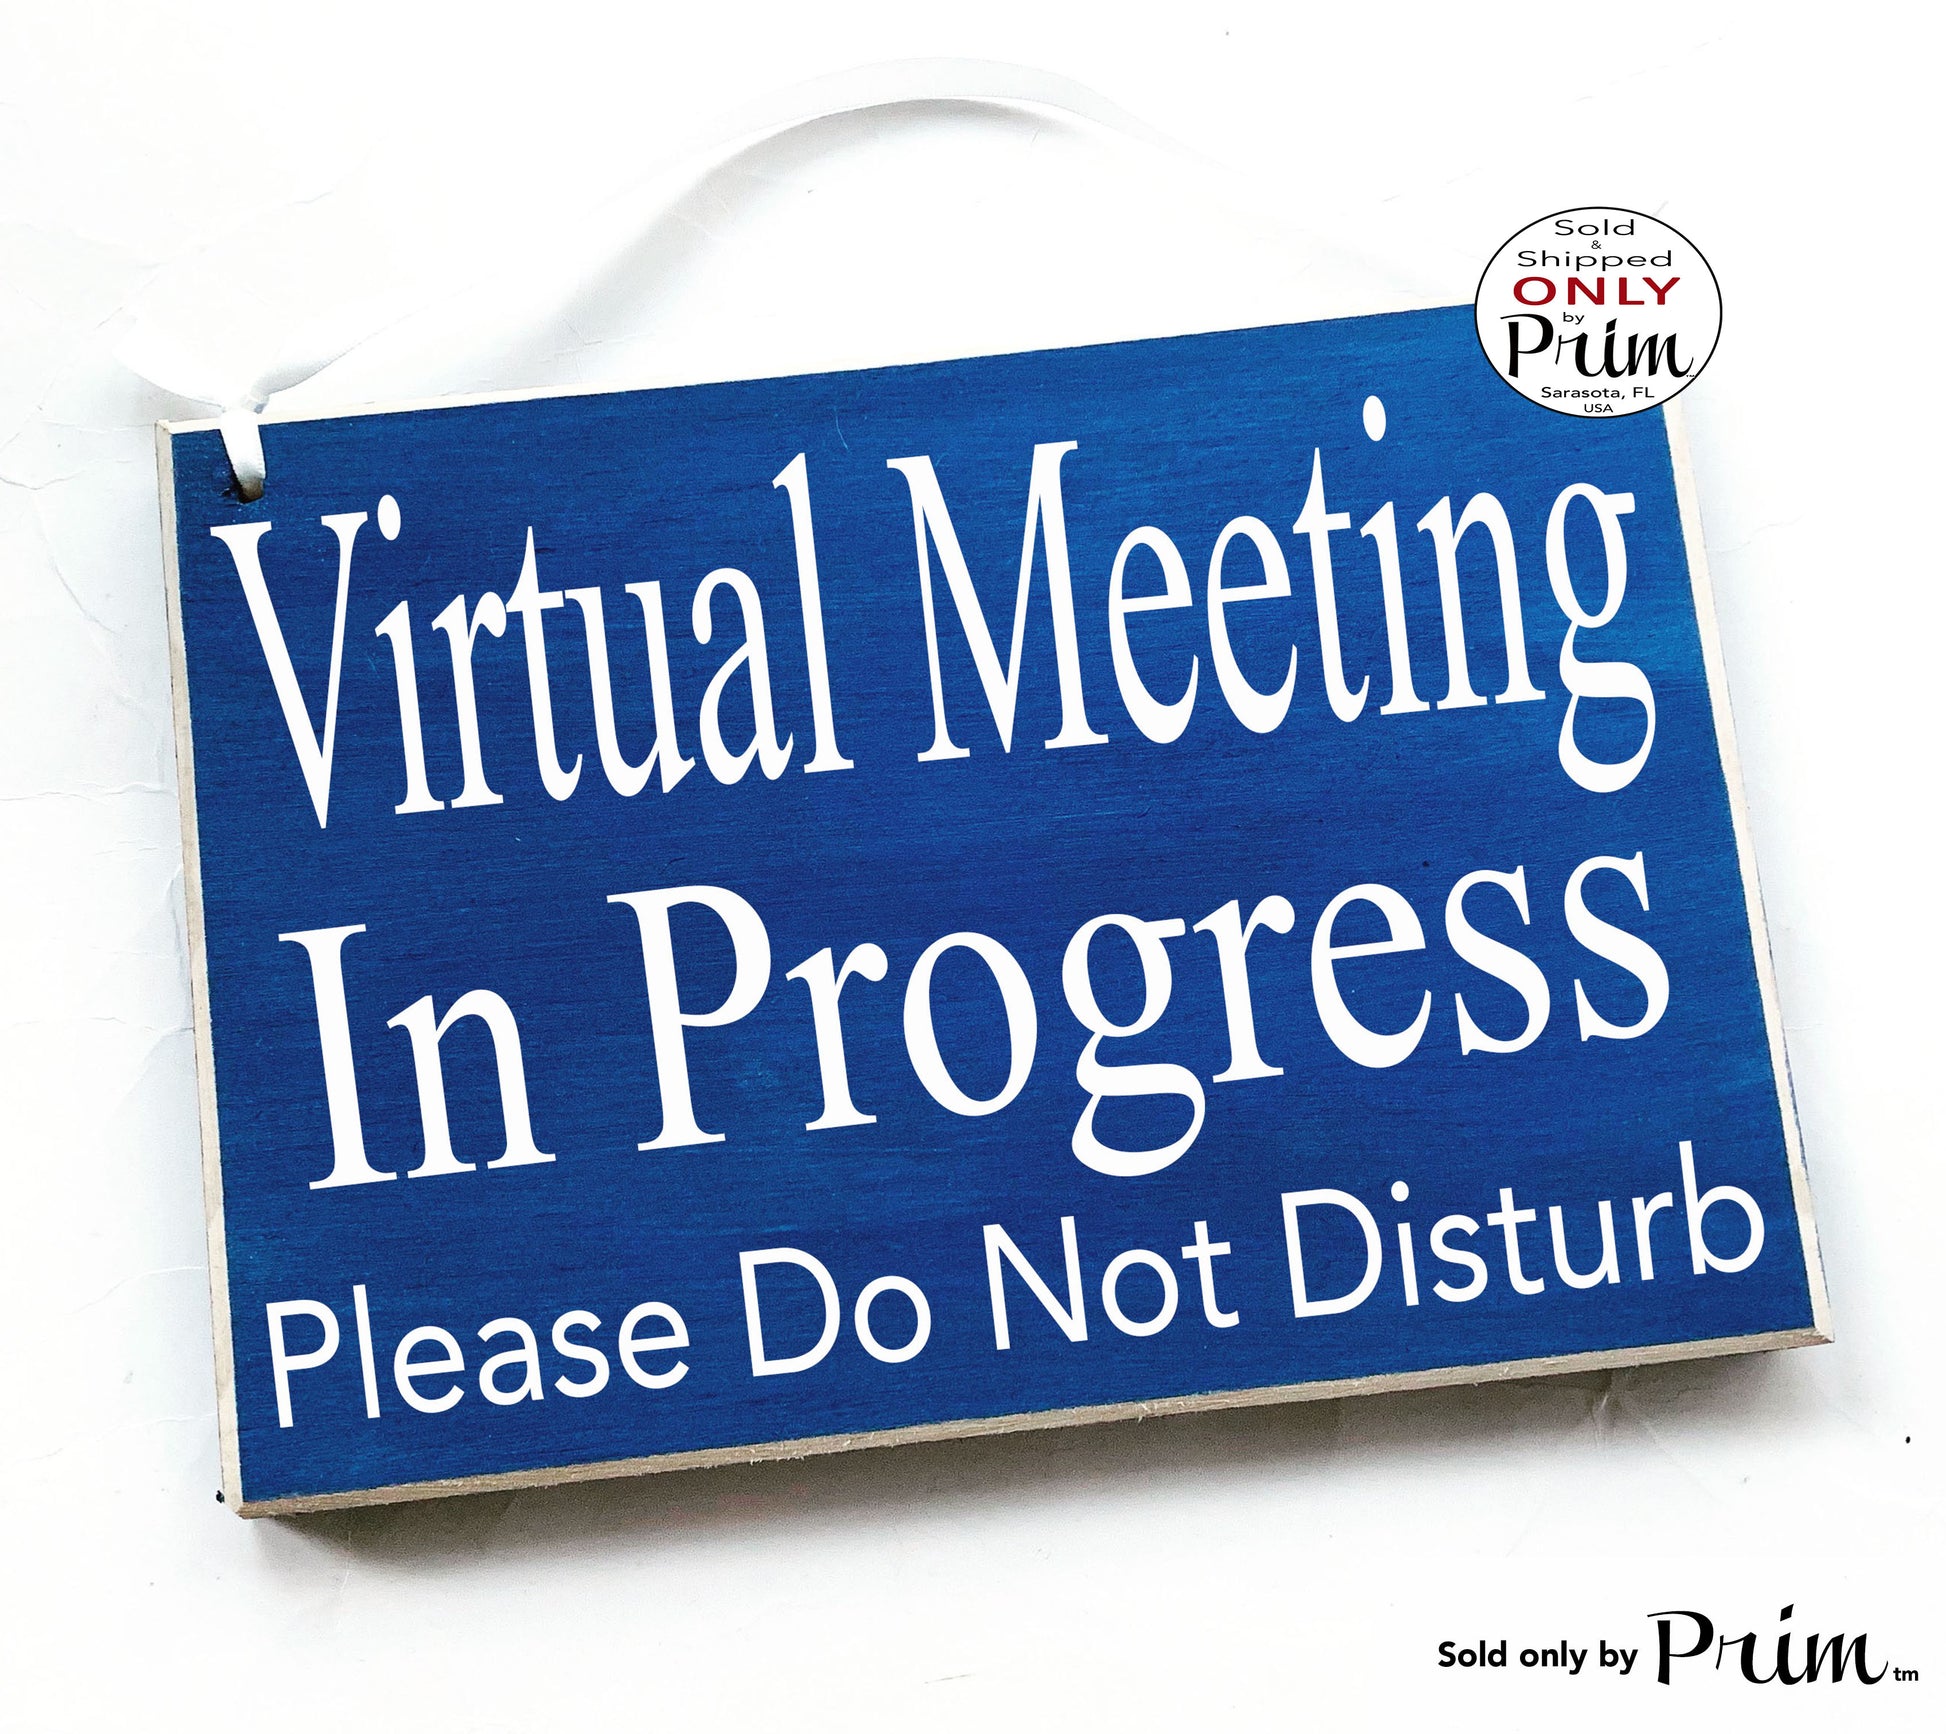 8x6 Virtual Meeting In Progress Please Do Not Disturb Custom Wood Sign | Home Office Working From Home Busy In Session Progress Door Plaque Designs by Prim